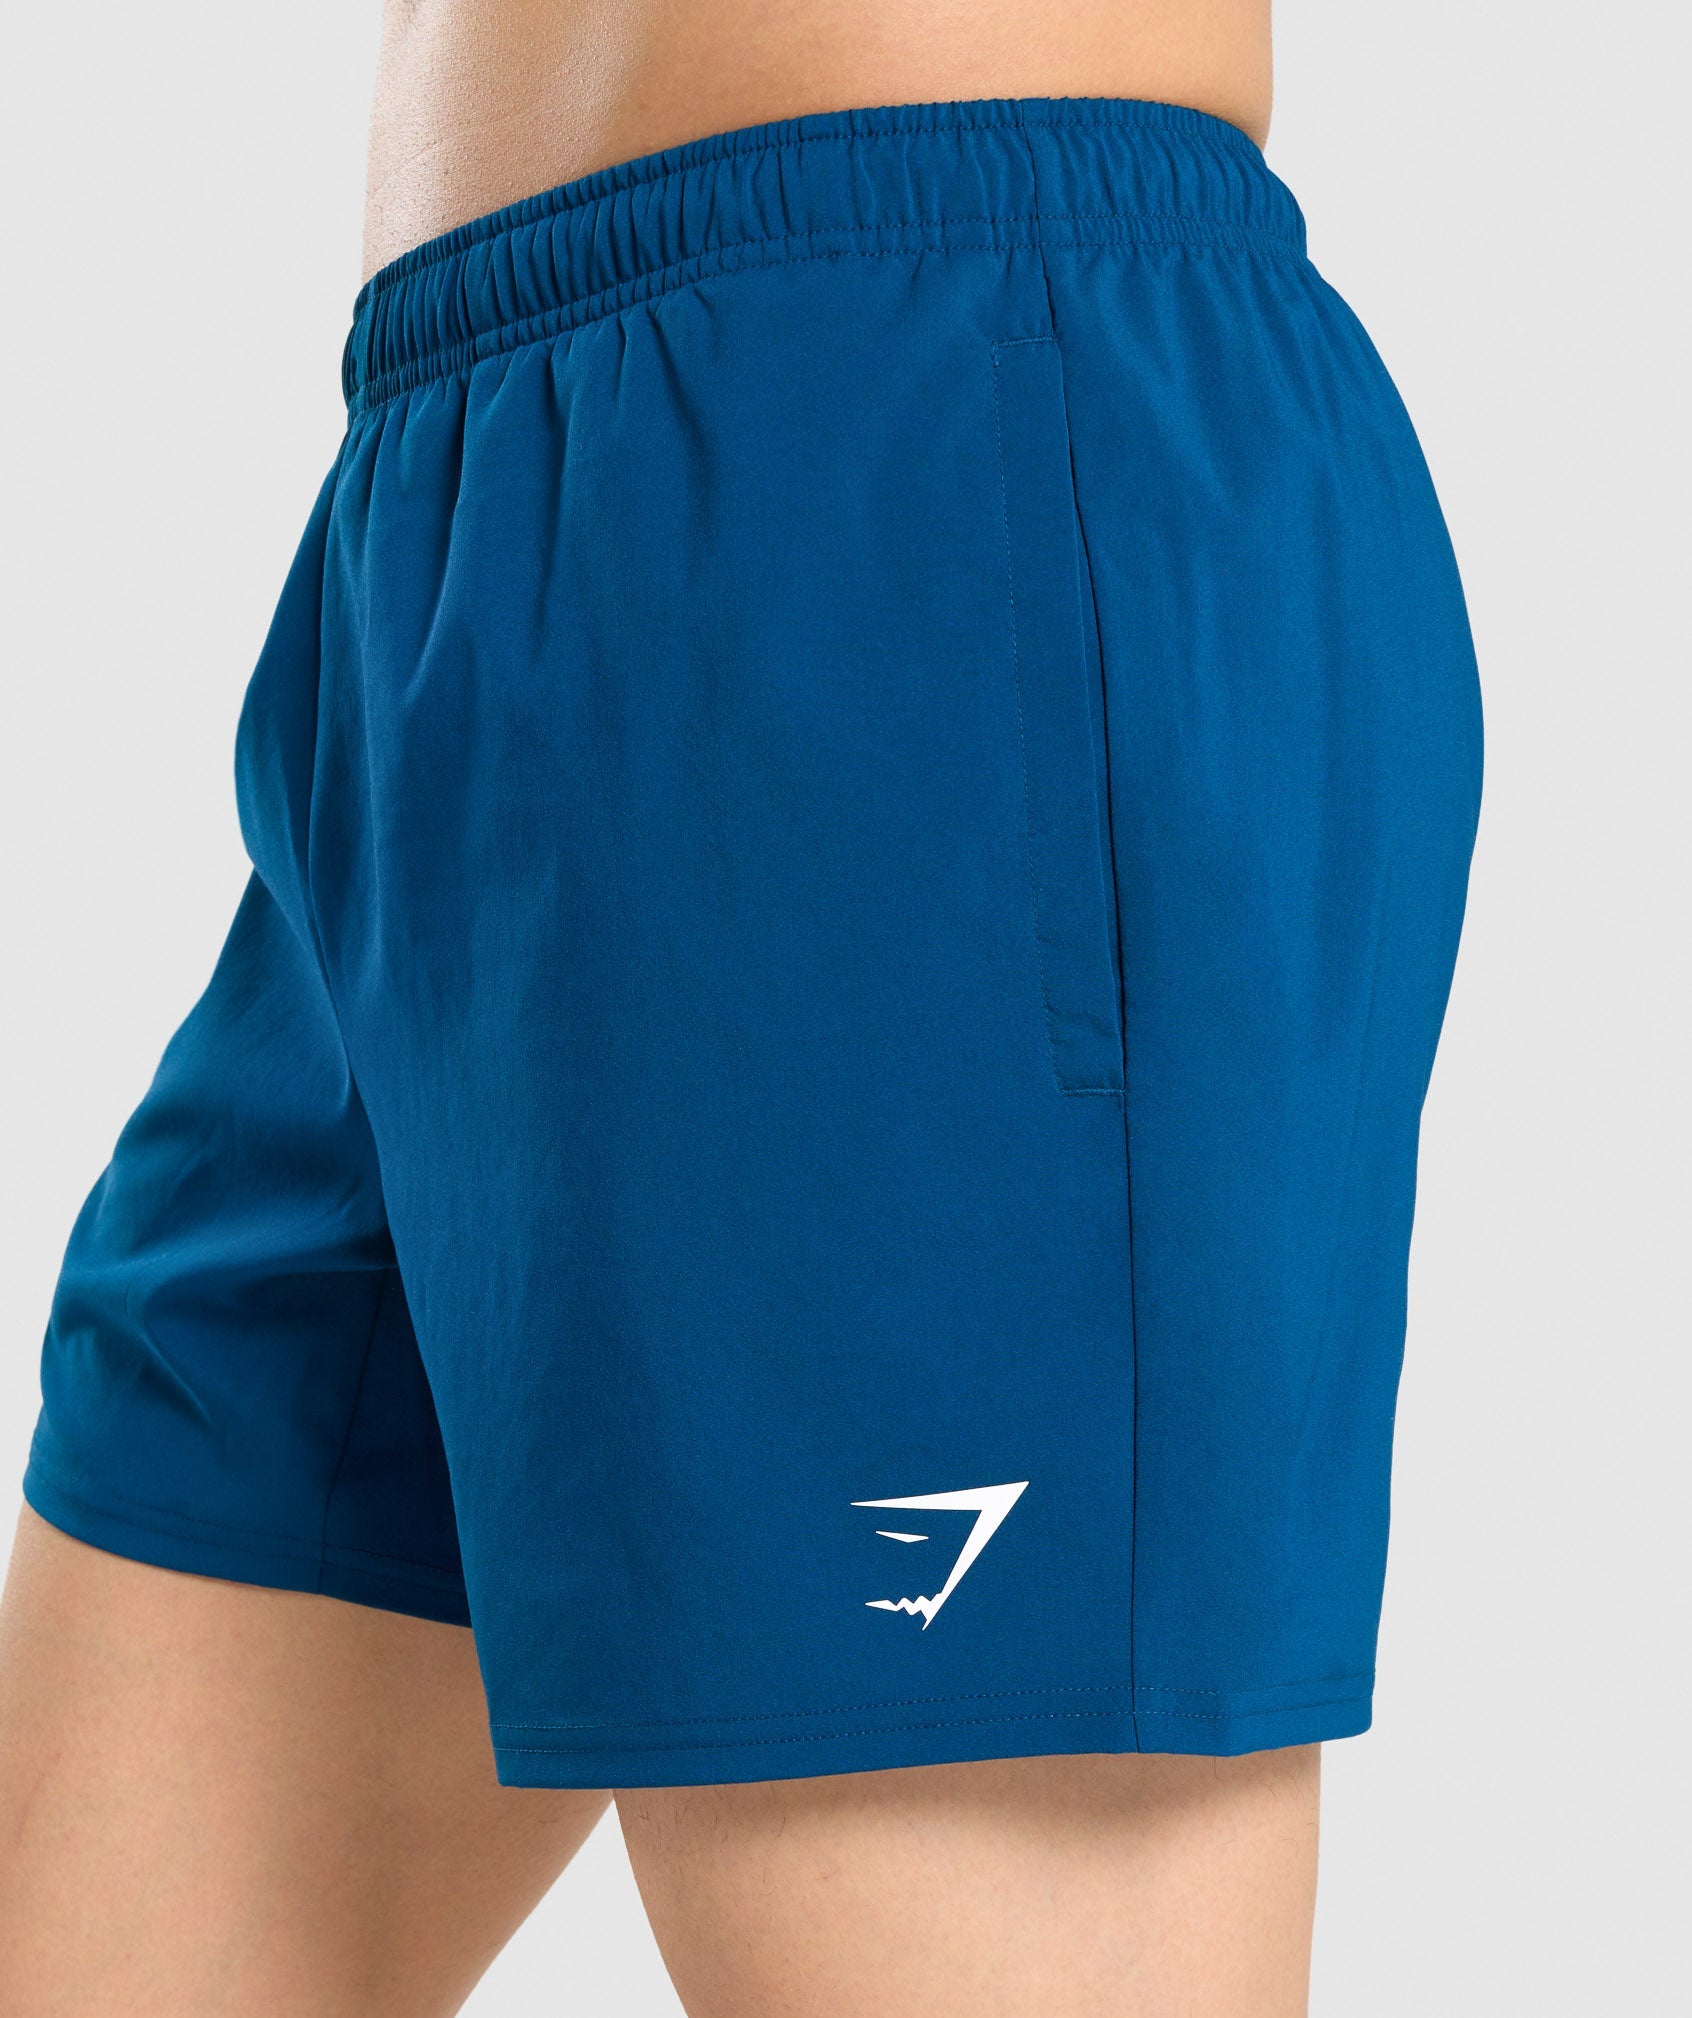 Arrival 5" Shorts in Petrol Blue - view 6